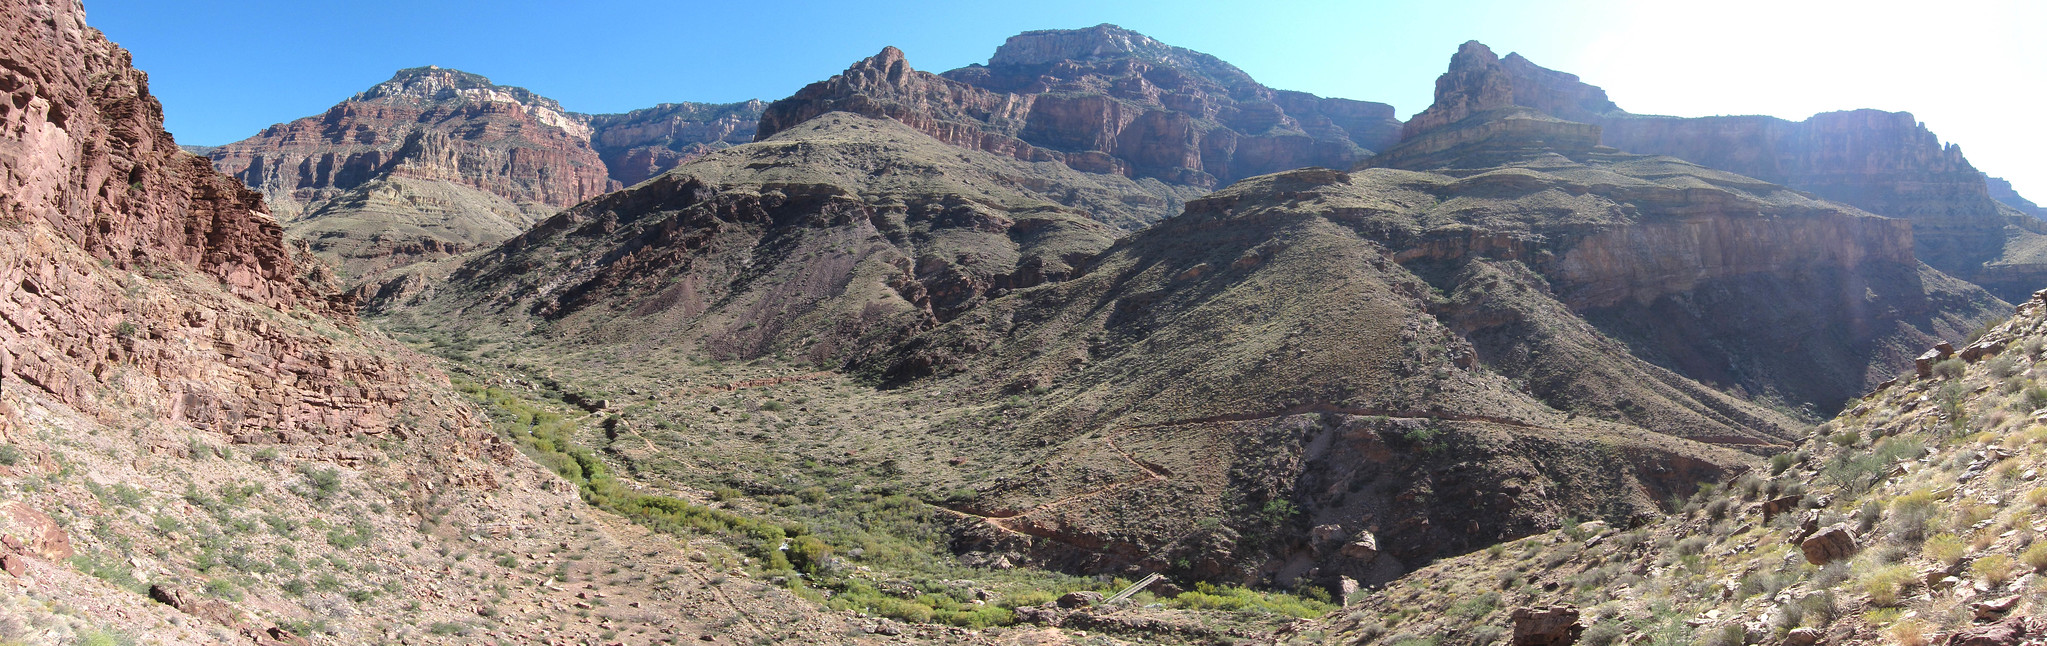 The North Kaibab Trail descends through a narrow part of the canyon known as the box